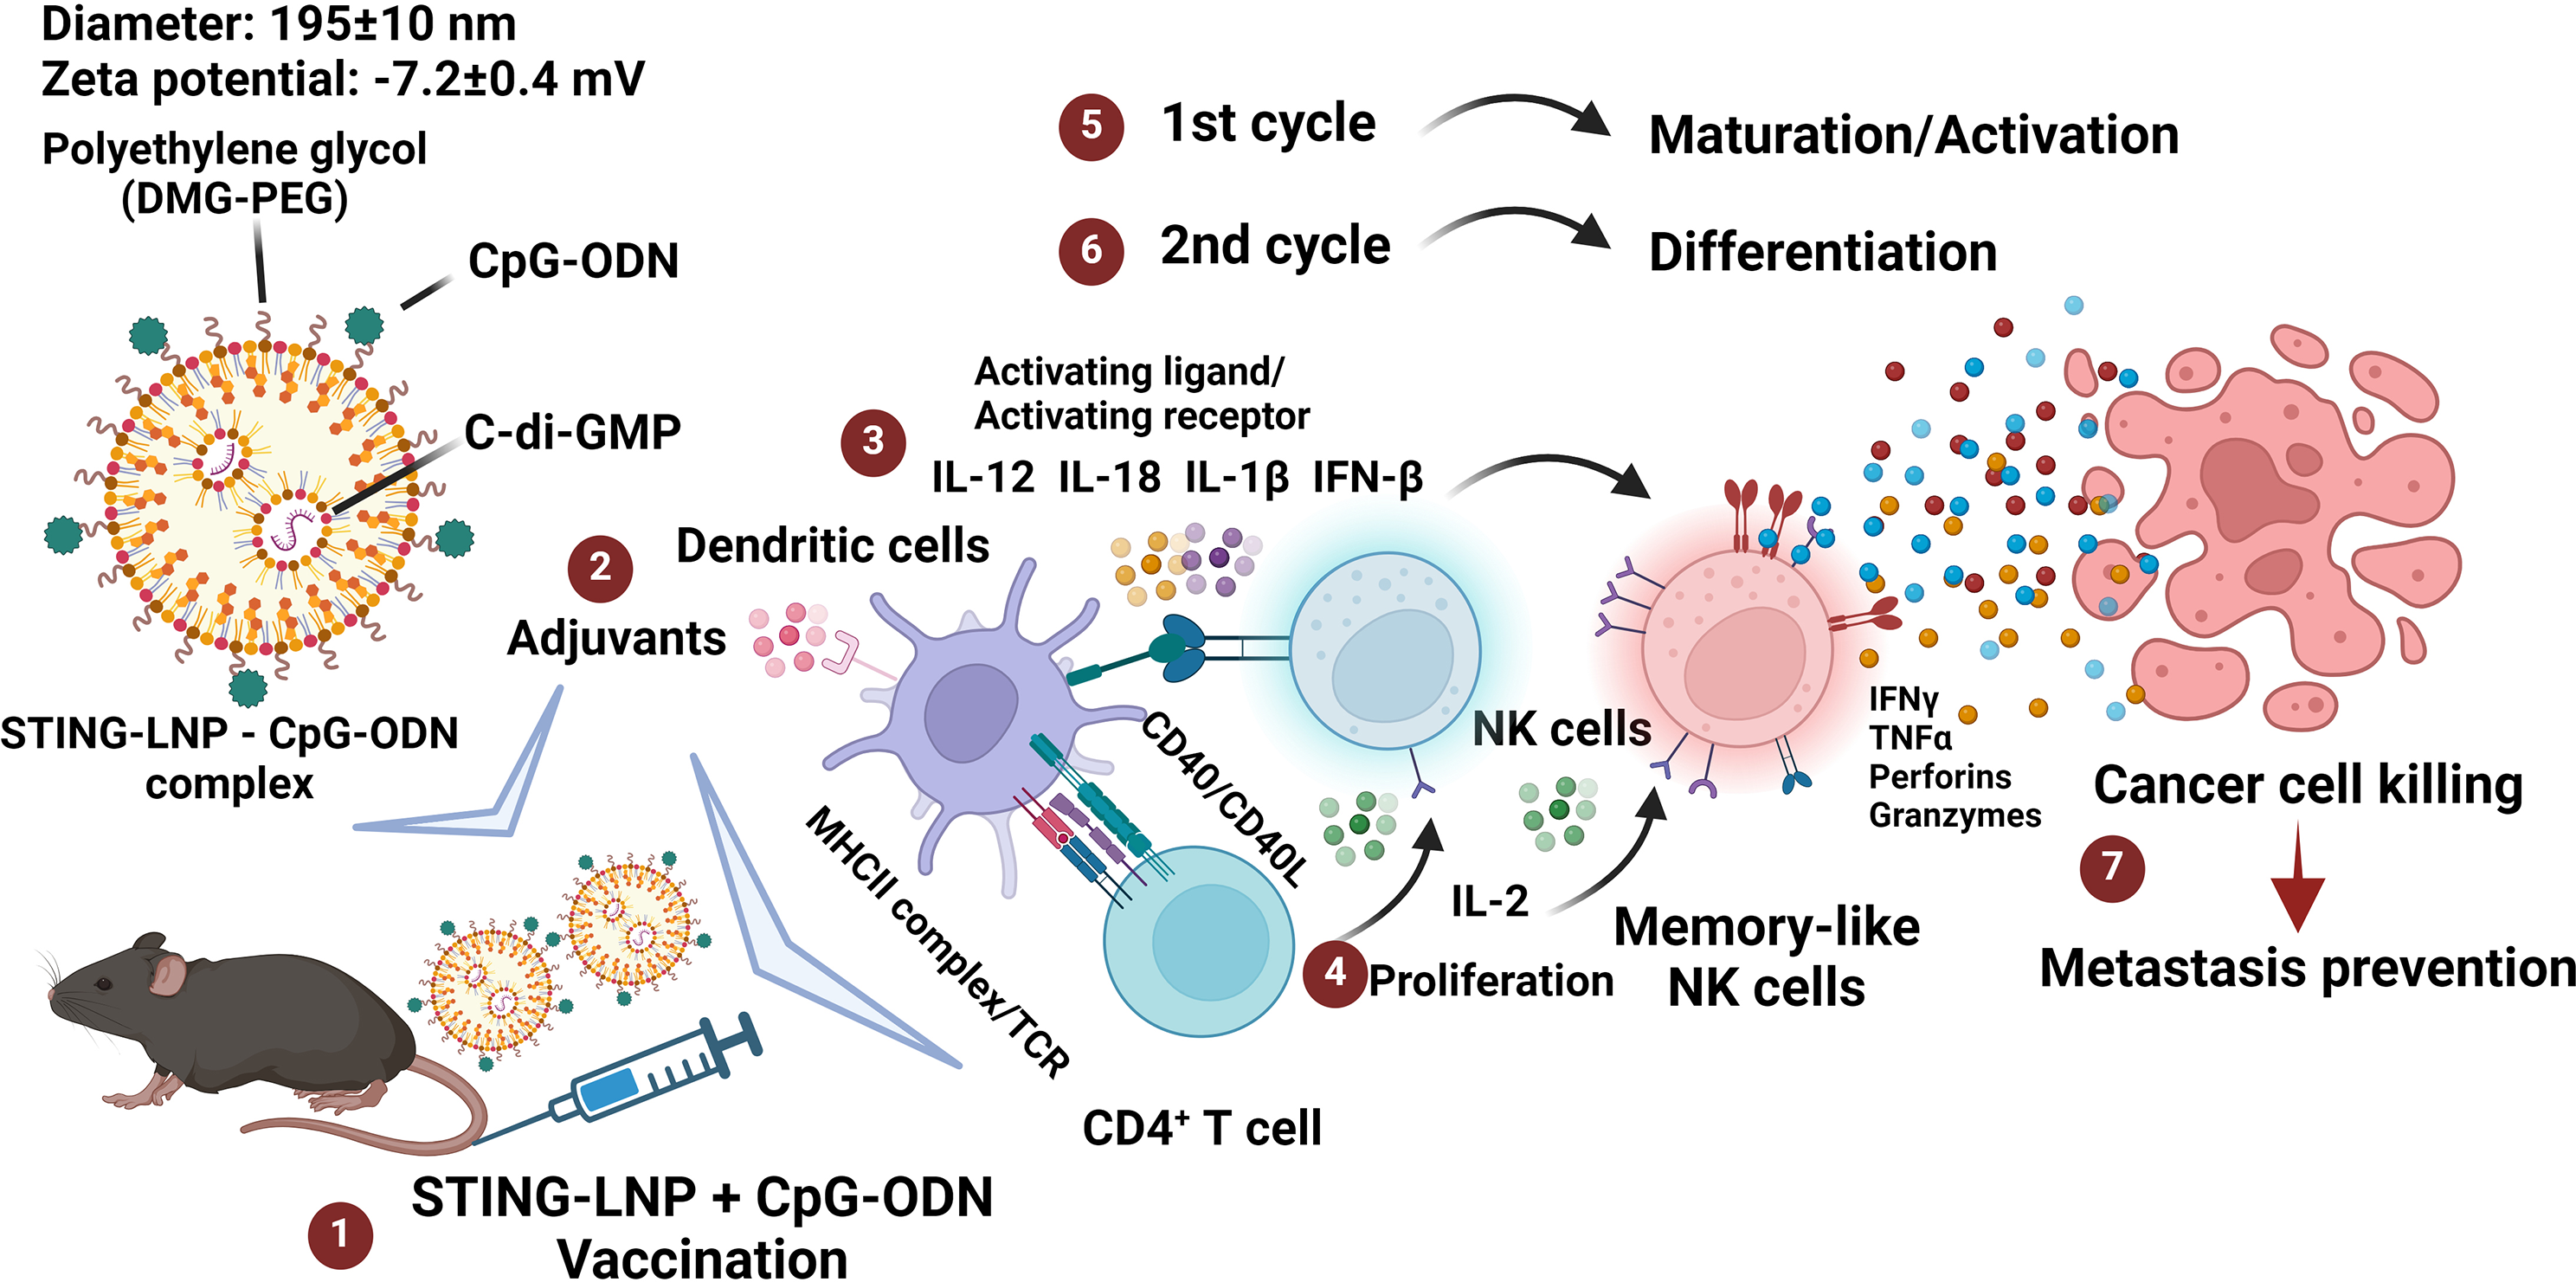 Vaccination with a combination of STING agonist-loaded lipid nanoparticles and CpG-ODNs protects against lung metastasis via the induction of CD11bhighCD27low memory-like NK cells